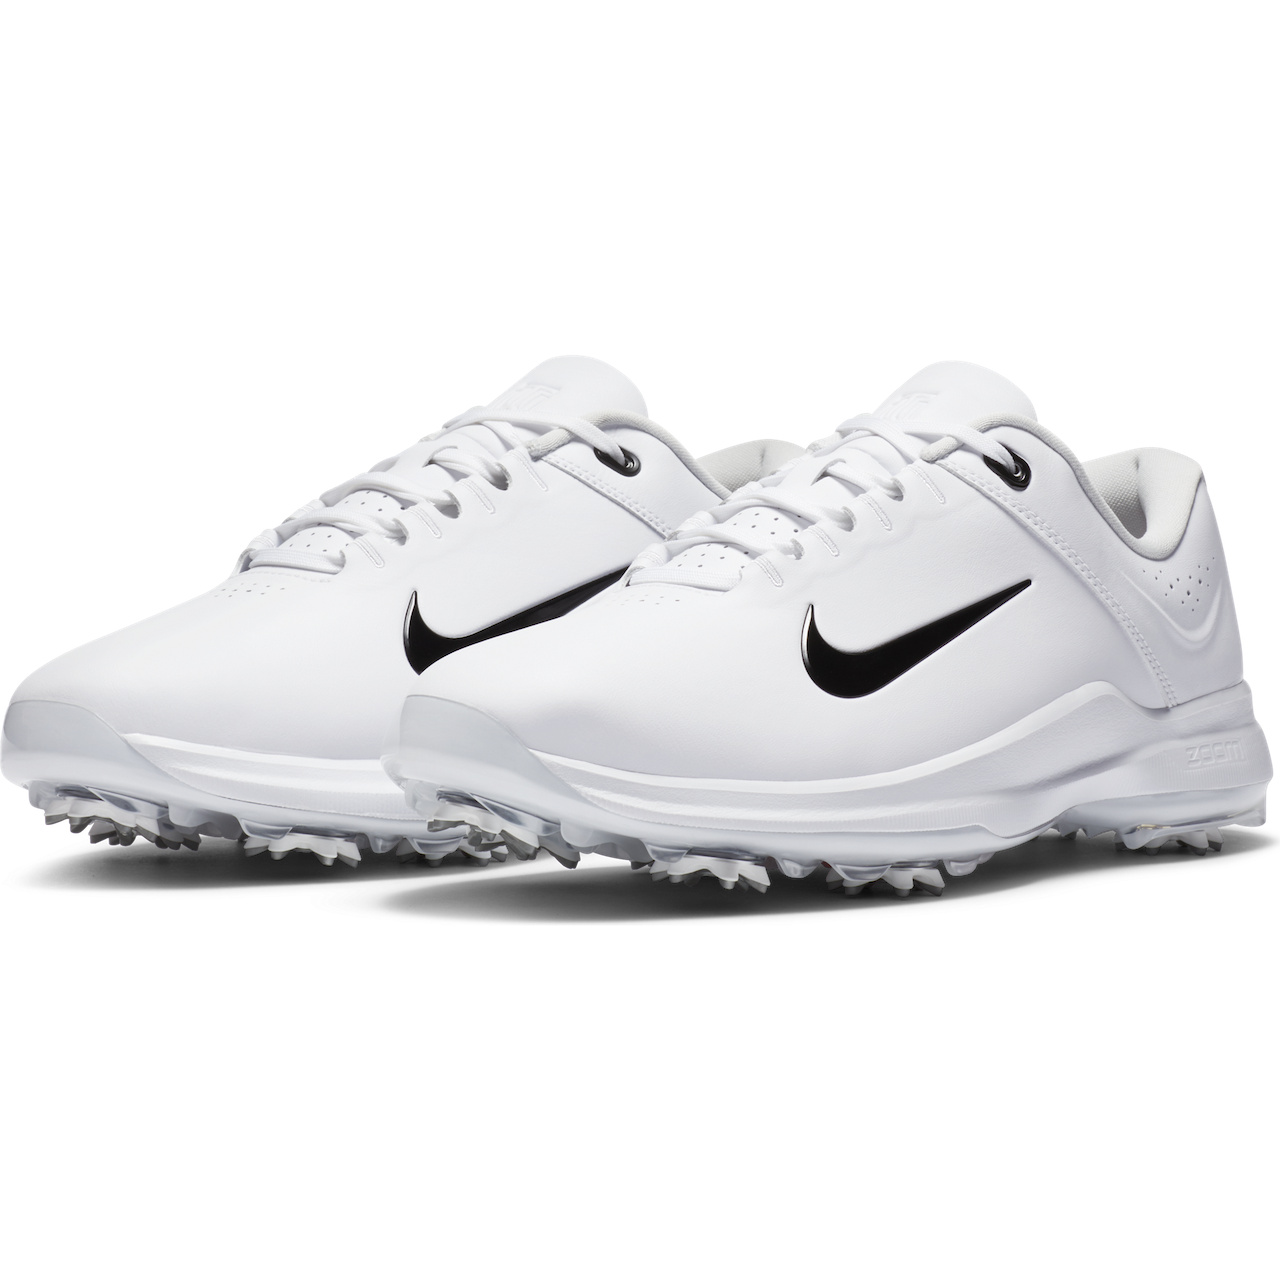 Tiger Woods' 2020 Nike Golf Shoes 